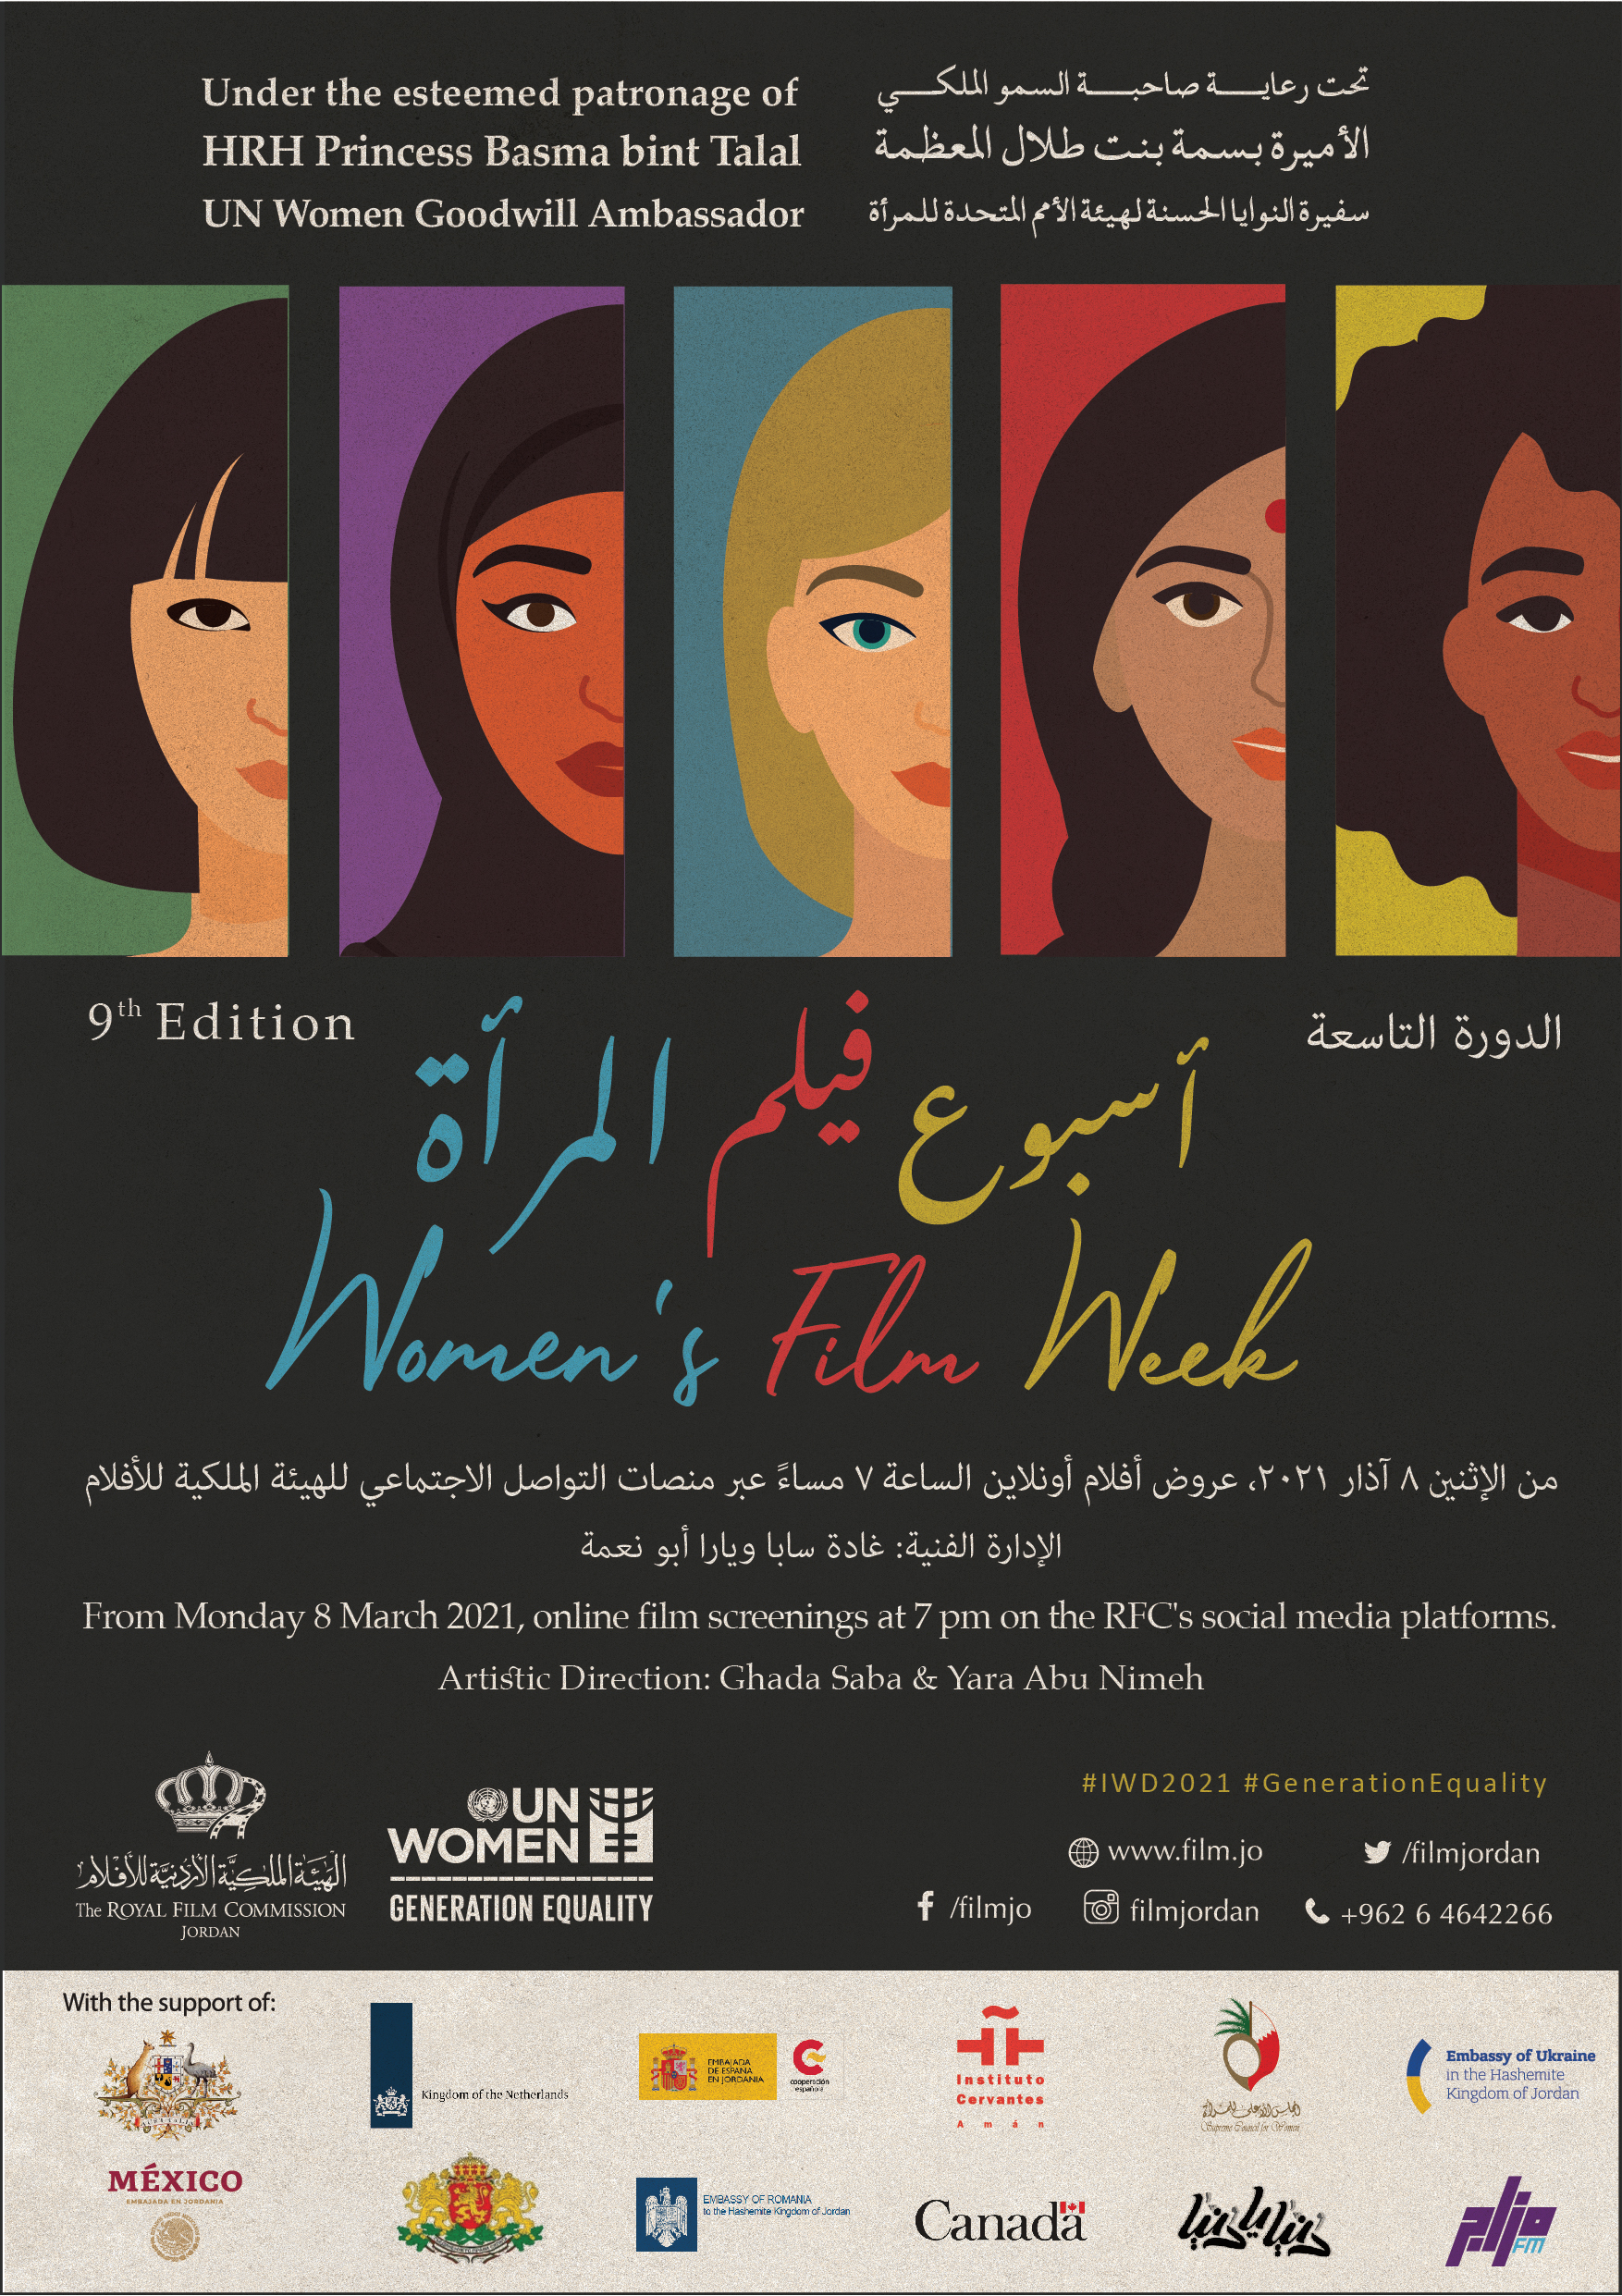 UN WOMEN AND THE ROYAL FILM COMMISSION LAUNCH THE 9th EDITION OF THE WOMEN’S FILM WEEK